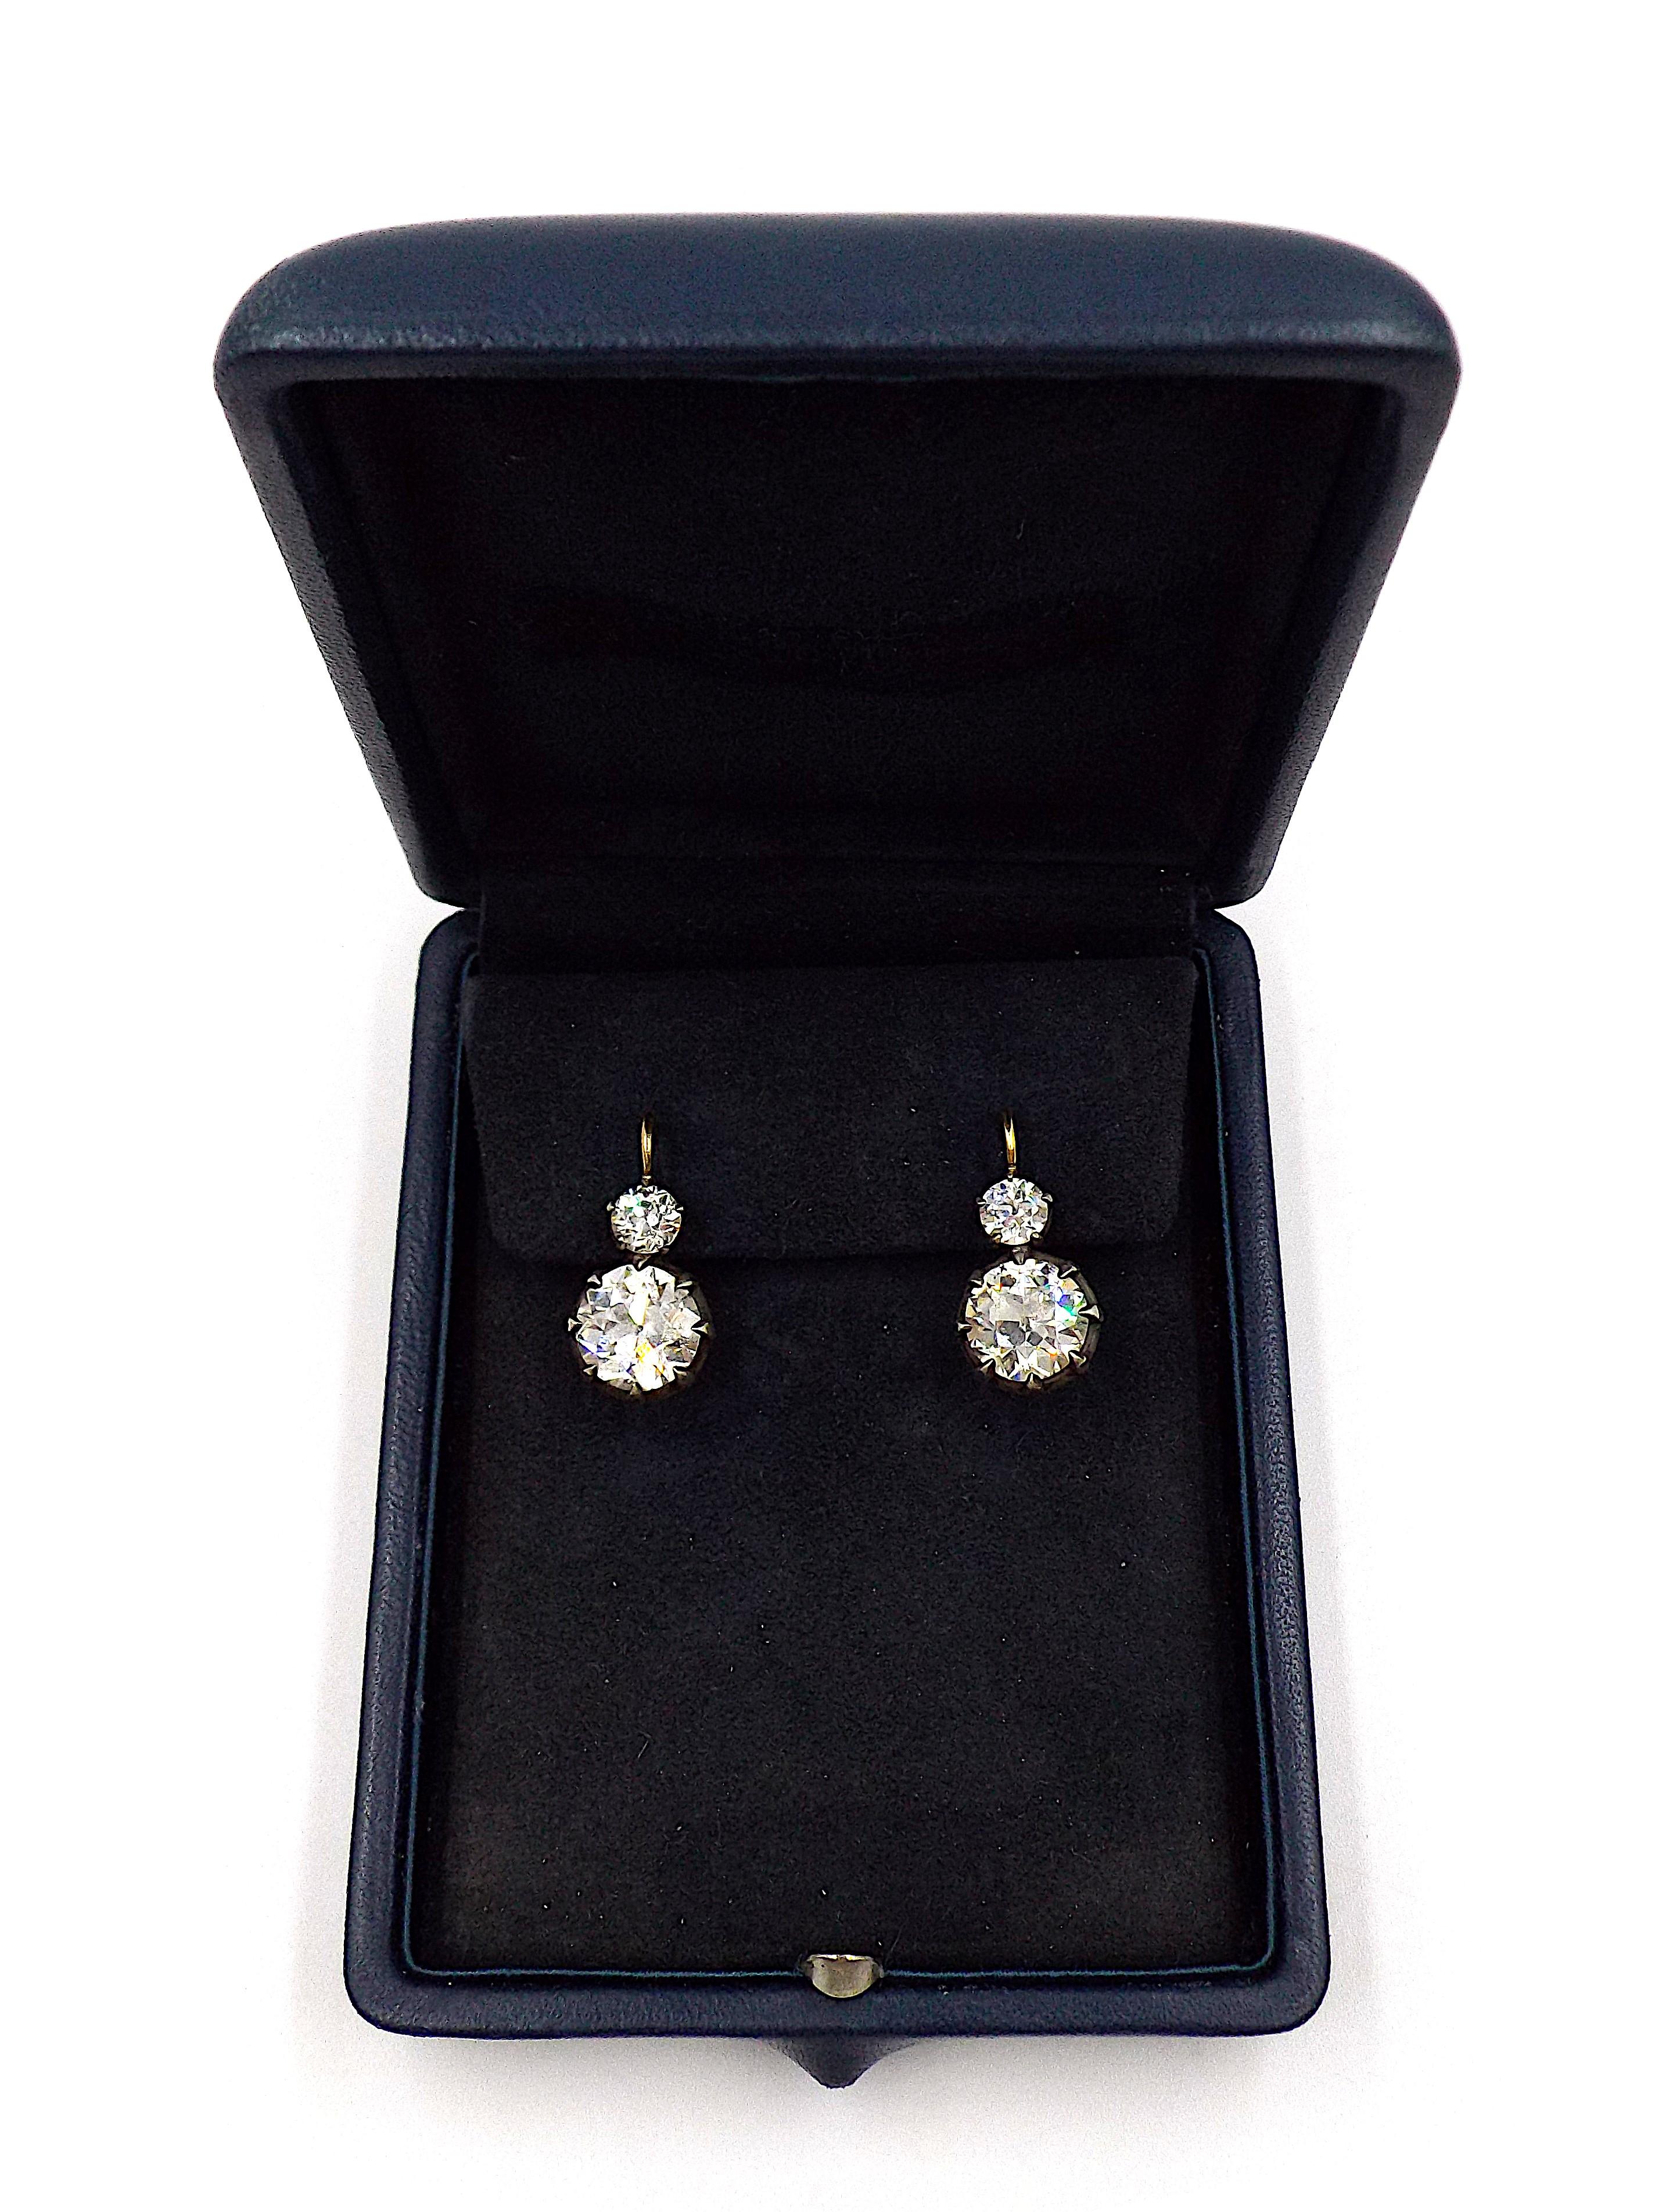 A pair of elegant earrings featuring two old European cut diamonds weighing 3.03ct and 3.42ct. The upper stones weigh 1.21ct in total. Accompanied by two GIA certificates stating that the diamonds weighing 3.03ct and 3.42ct are of N color VS1